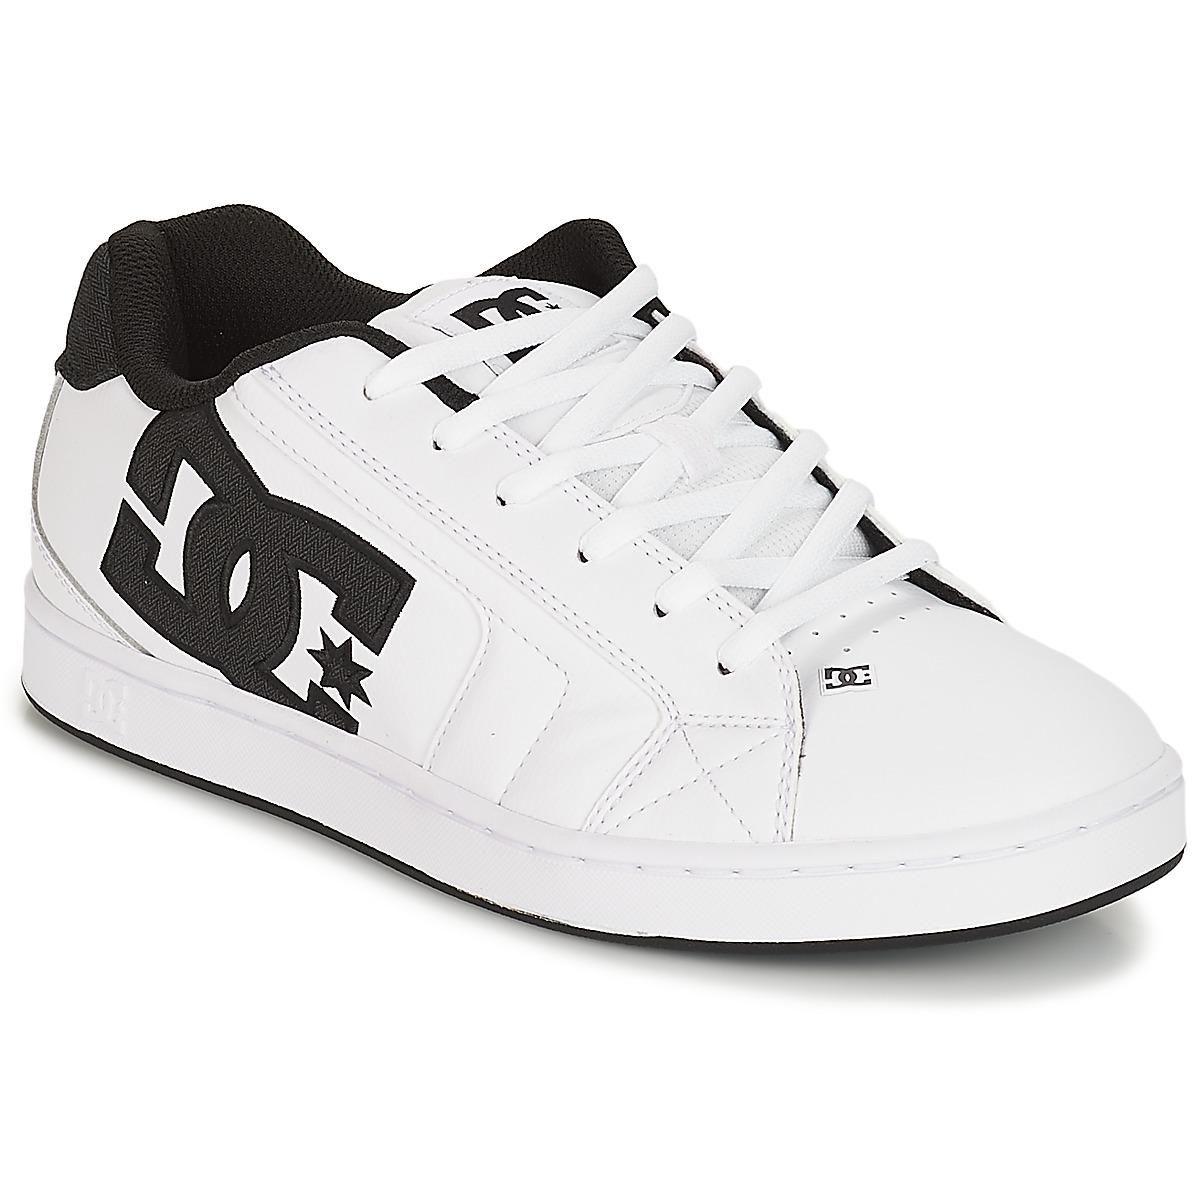 Black and White DC Shoes Logo - Dc Shoes Net Se M Shoe Xwwk Men's Skate Shoes (trainers) In White